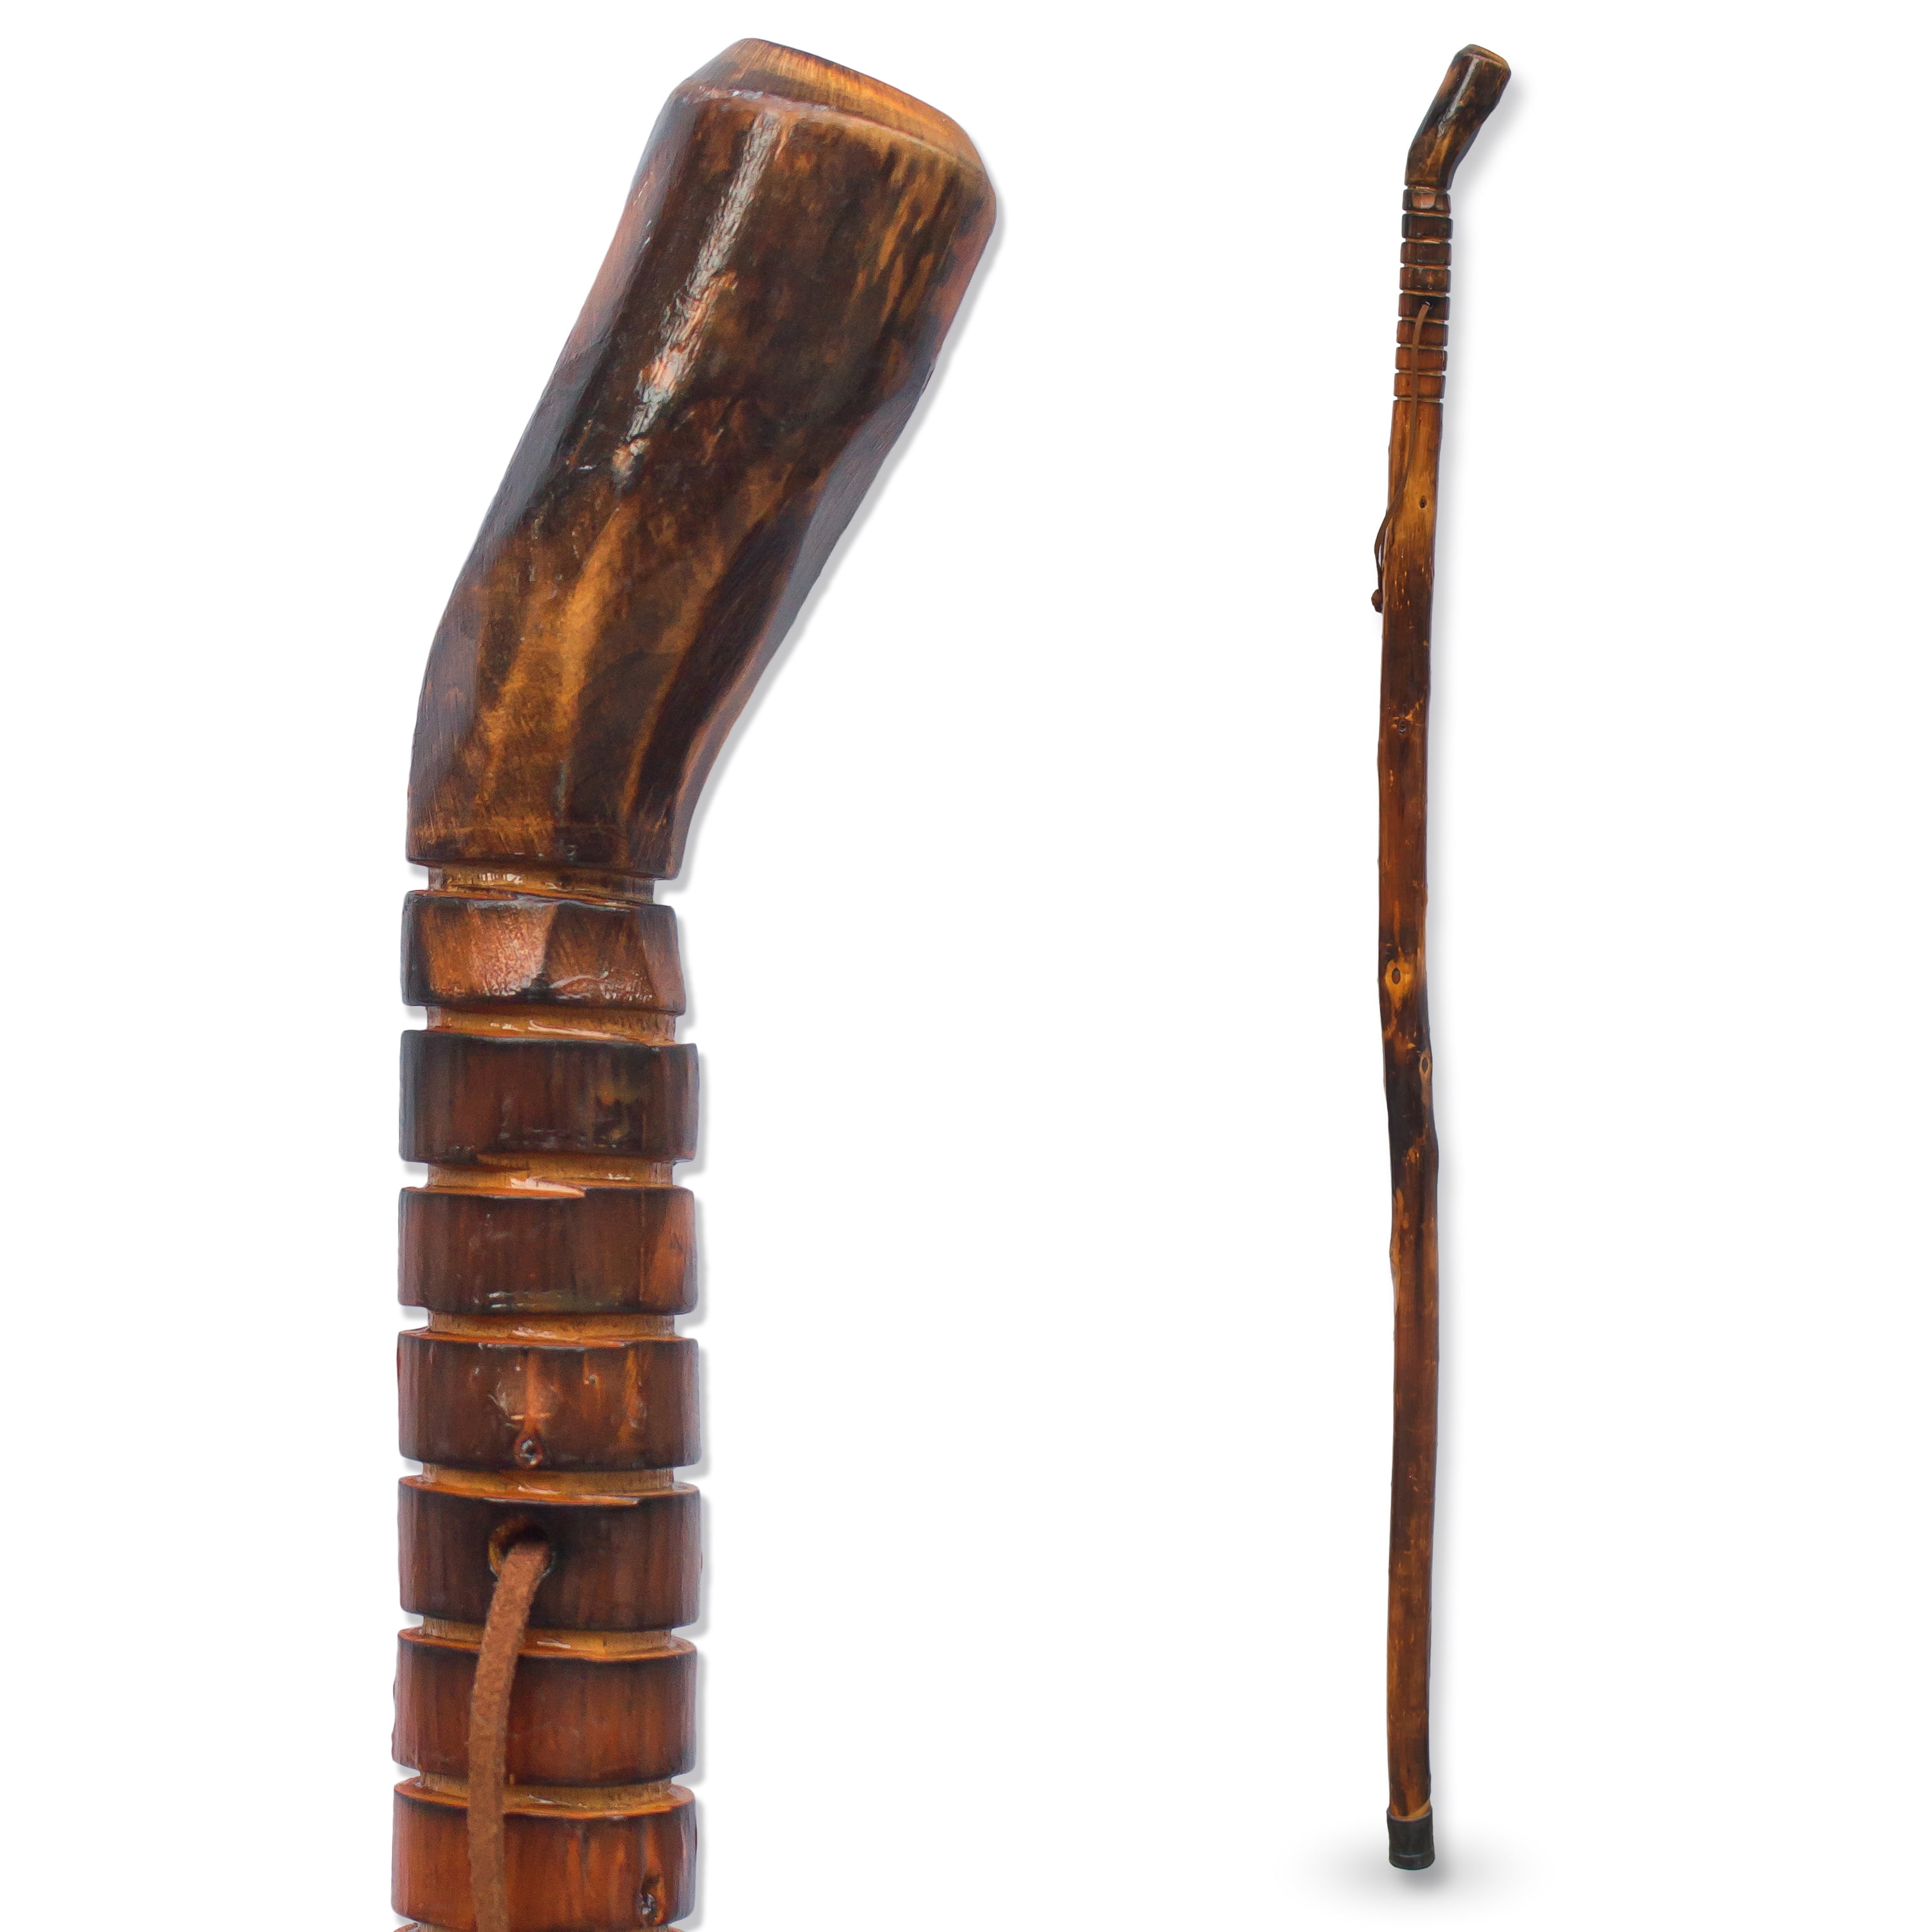 Hiking Walking Trekking Stick Made in the USA by Brazos Twisted Sweet Gum 48 inches Handcrafted Wooden Walking & Hiking Stick 